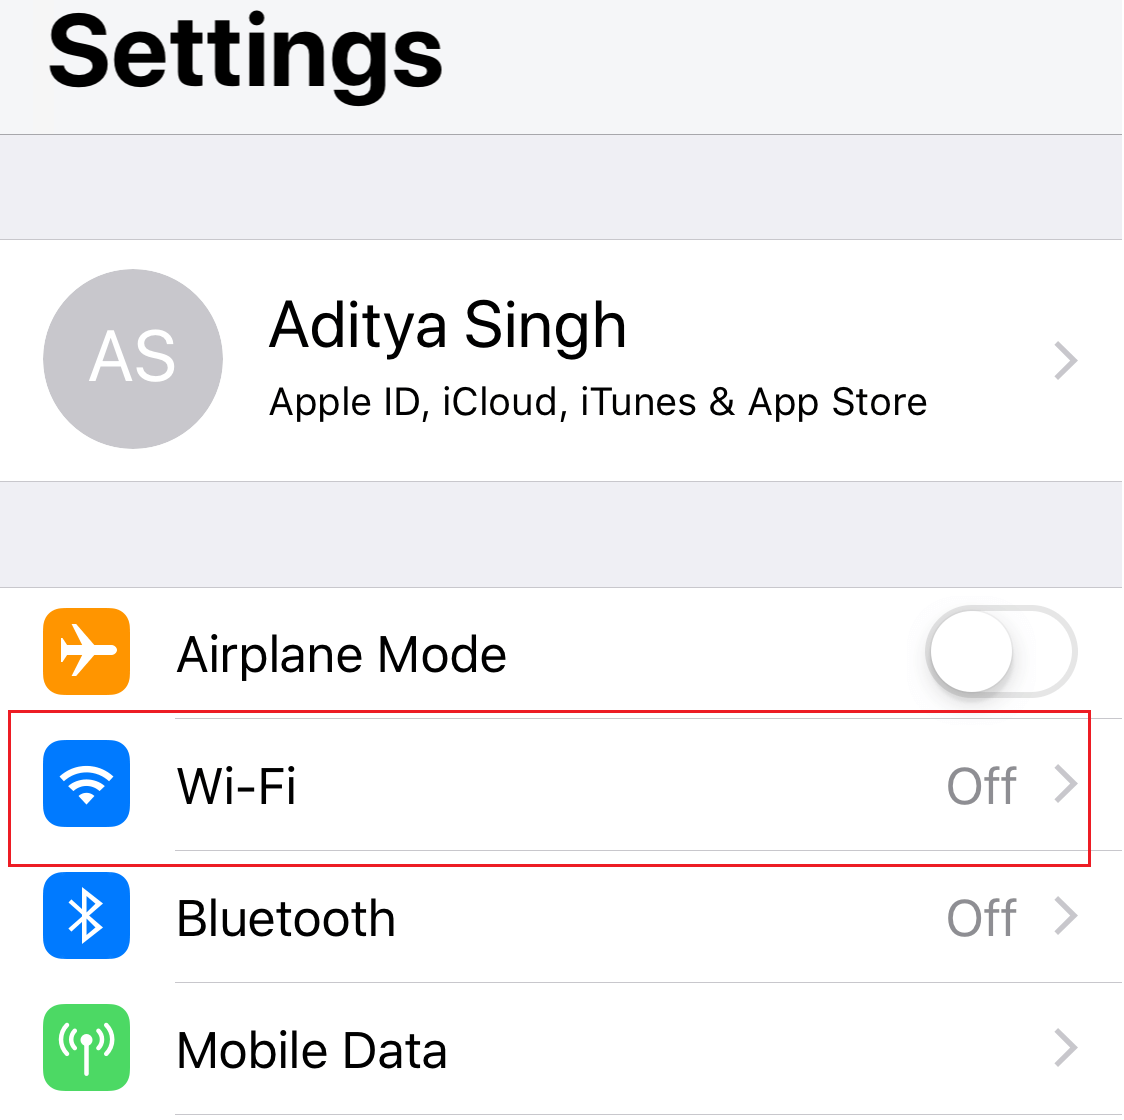 You need to navigate to the Settings section then click on WiFi